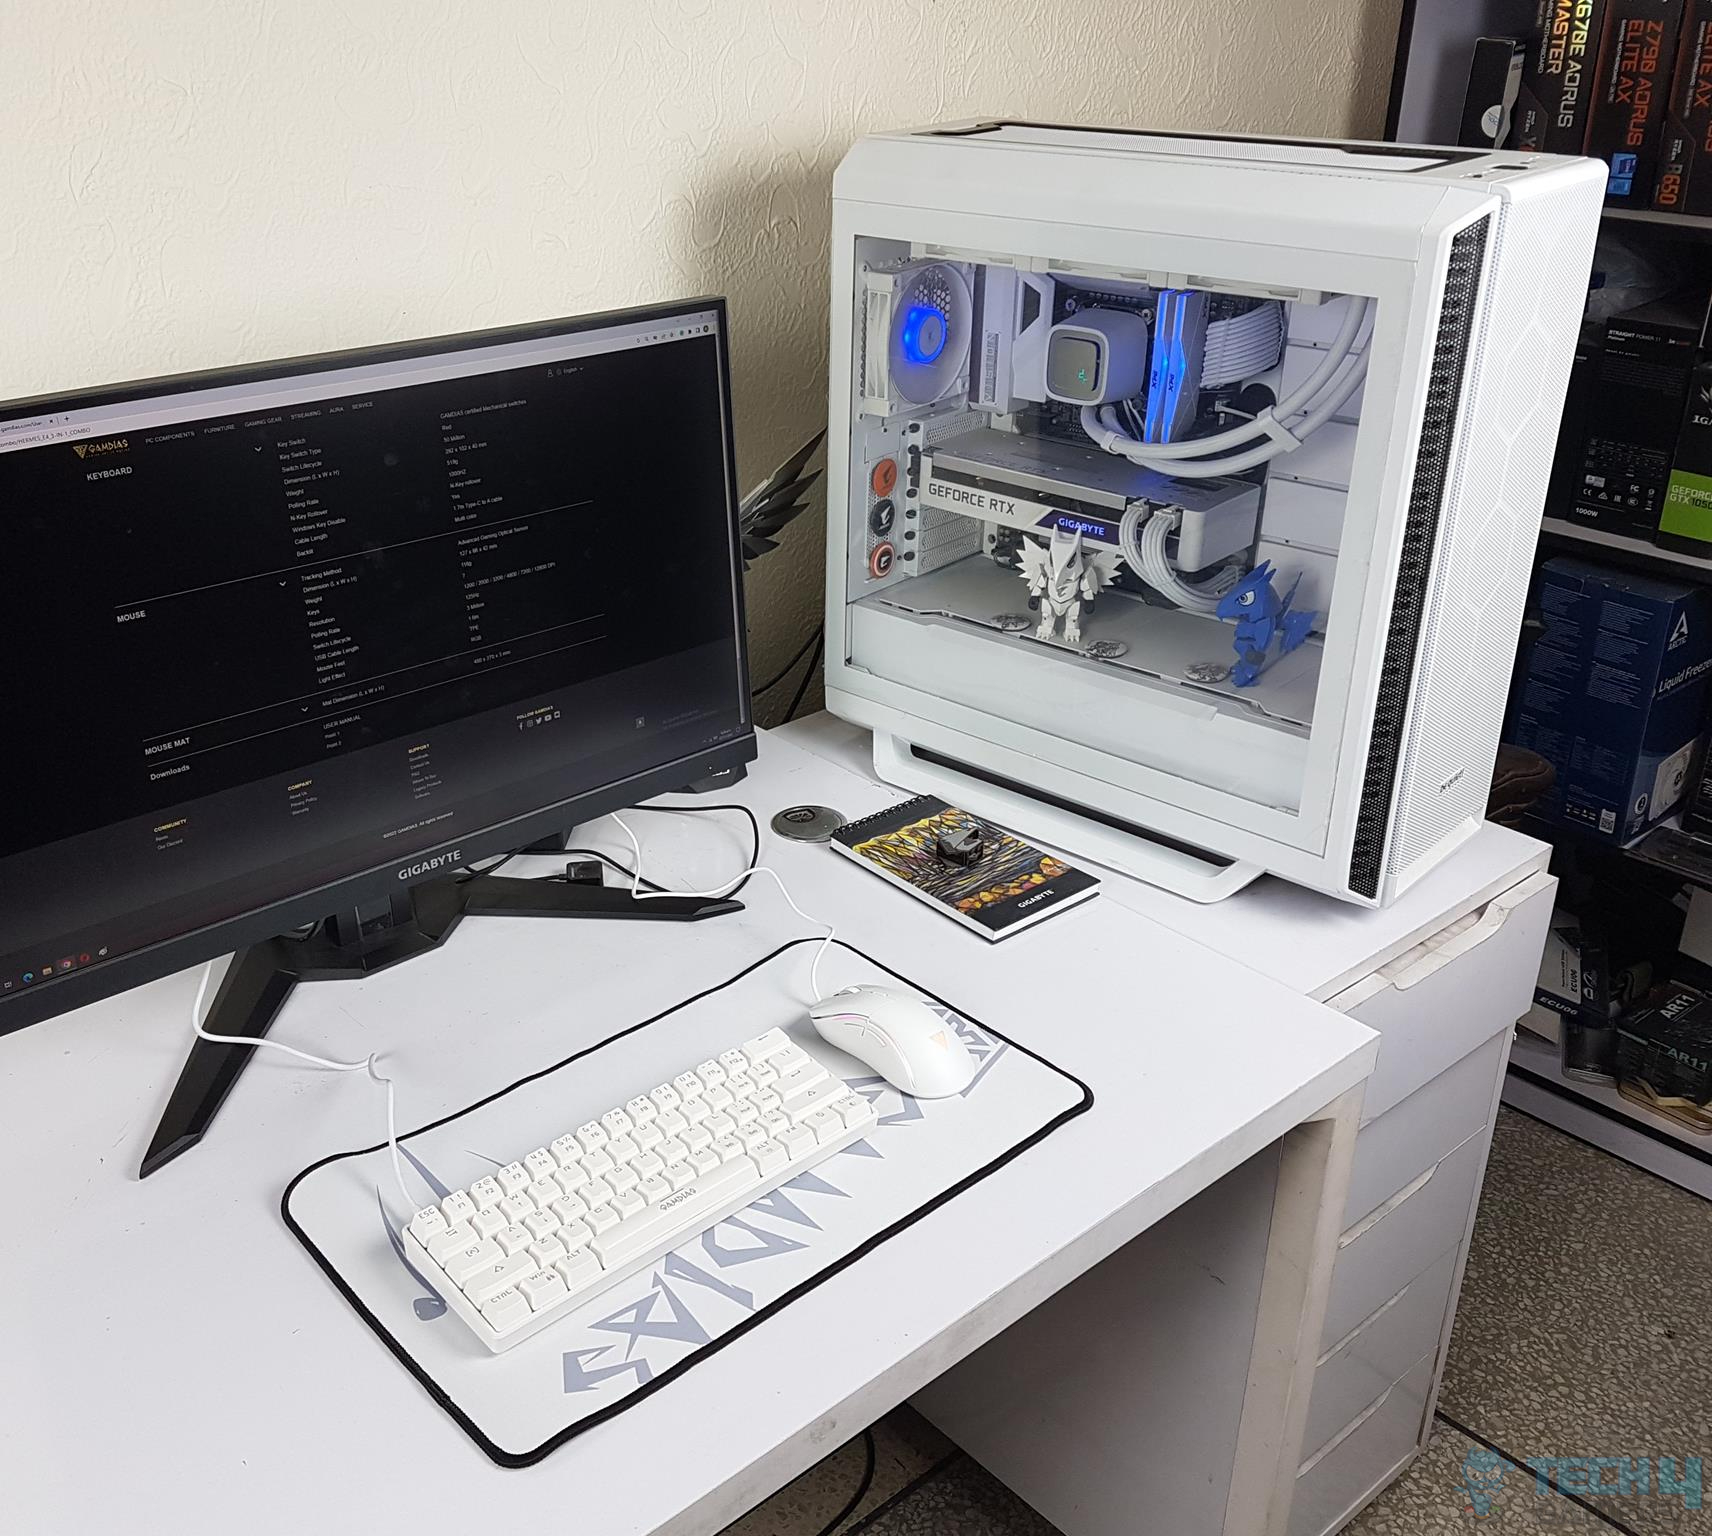 Showing off our gracefully elegant White PC Build being used to test-drive the GAMDIAS HERMES E4 3-IN-1 Combo.